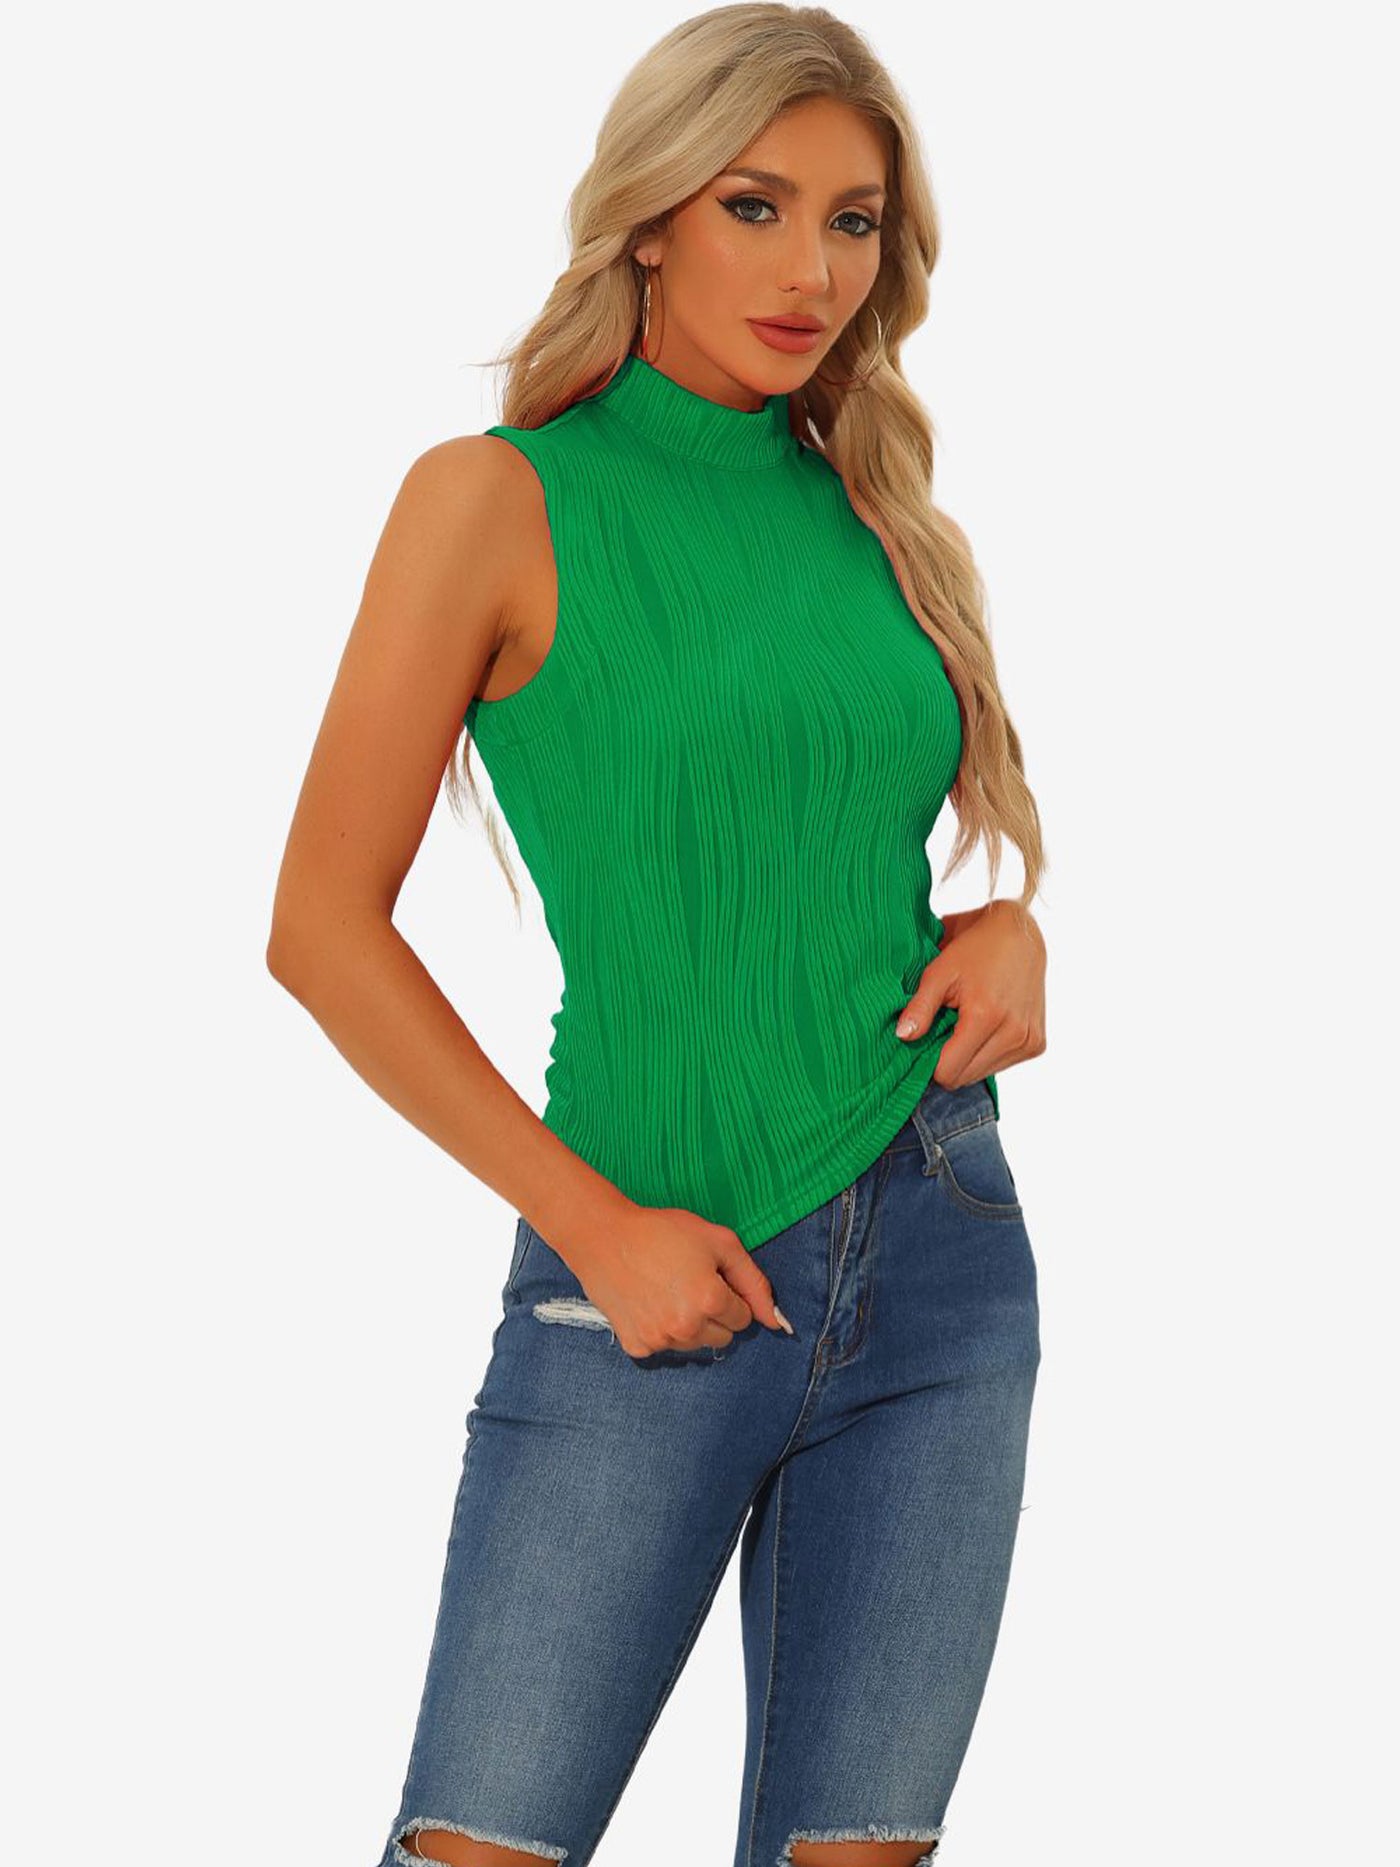 Allegra K Sleeveless Fitted Top Mock Neck Textured Ribbed Knit Tank Tops